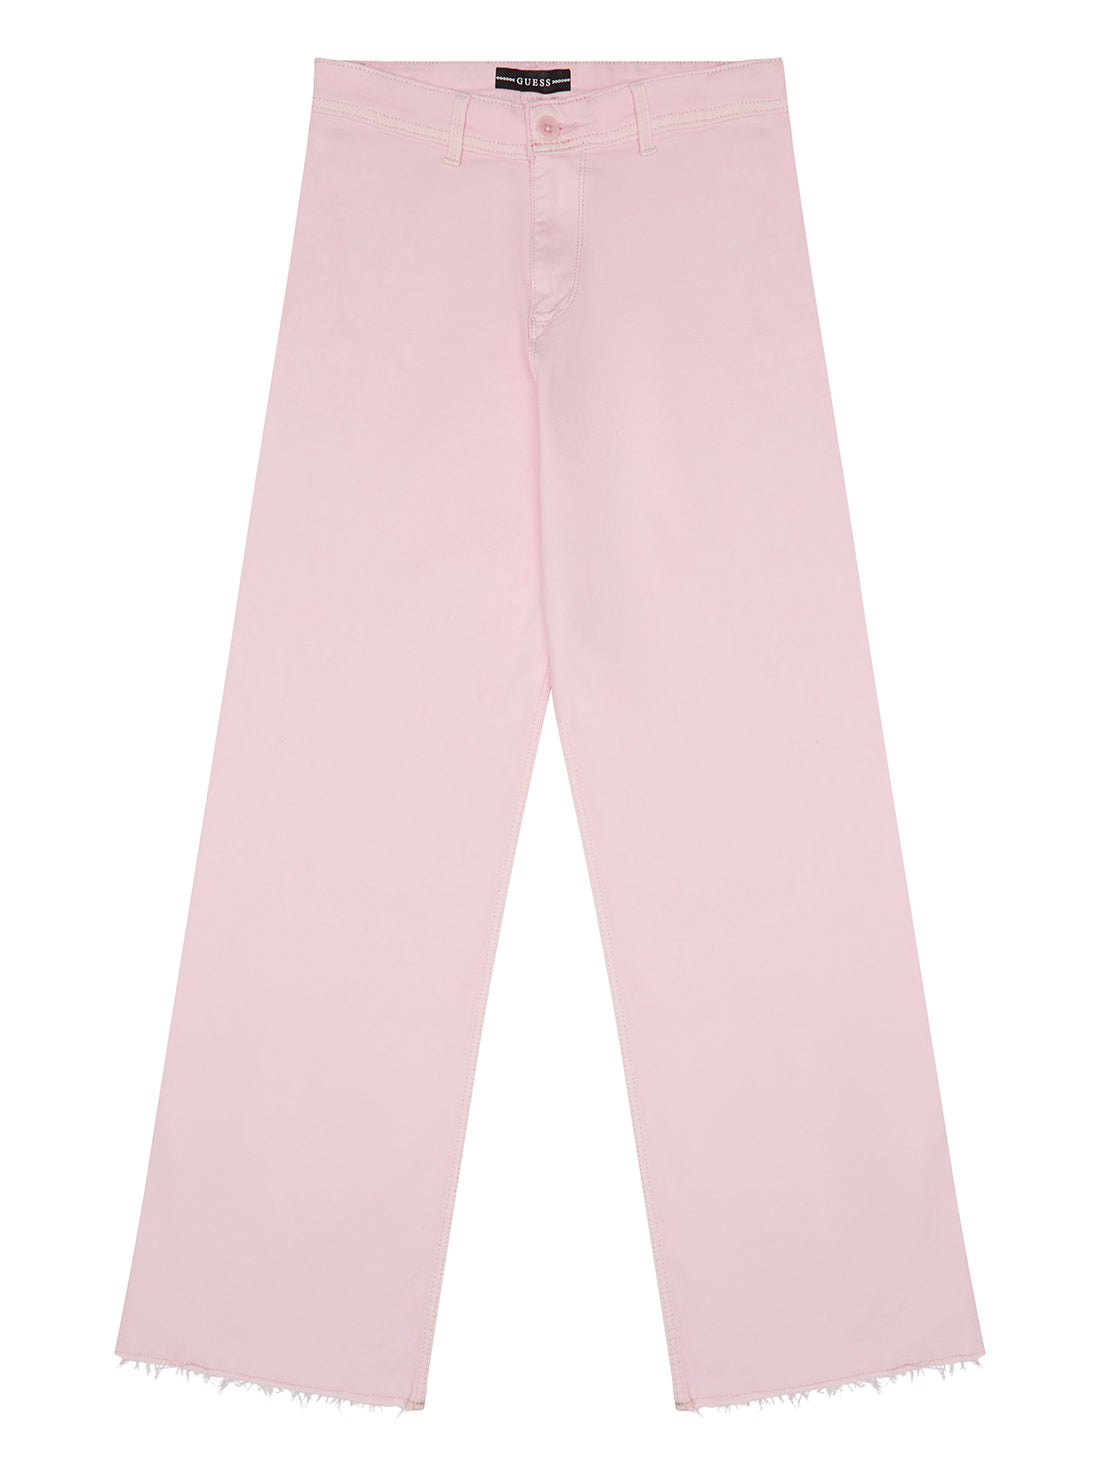 GUESS Pink Bull Denim Culotte Pants (7-16) front view